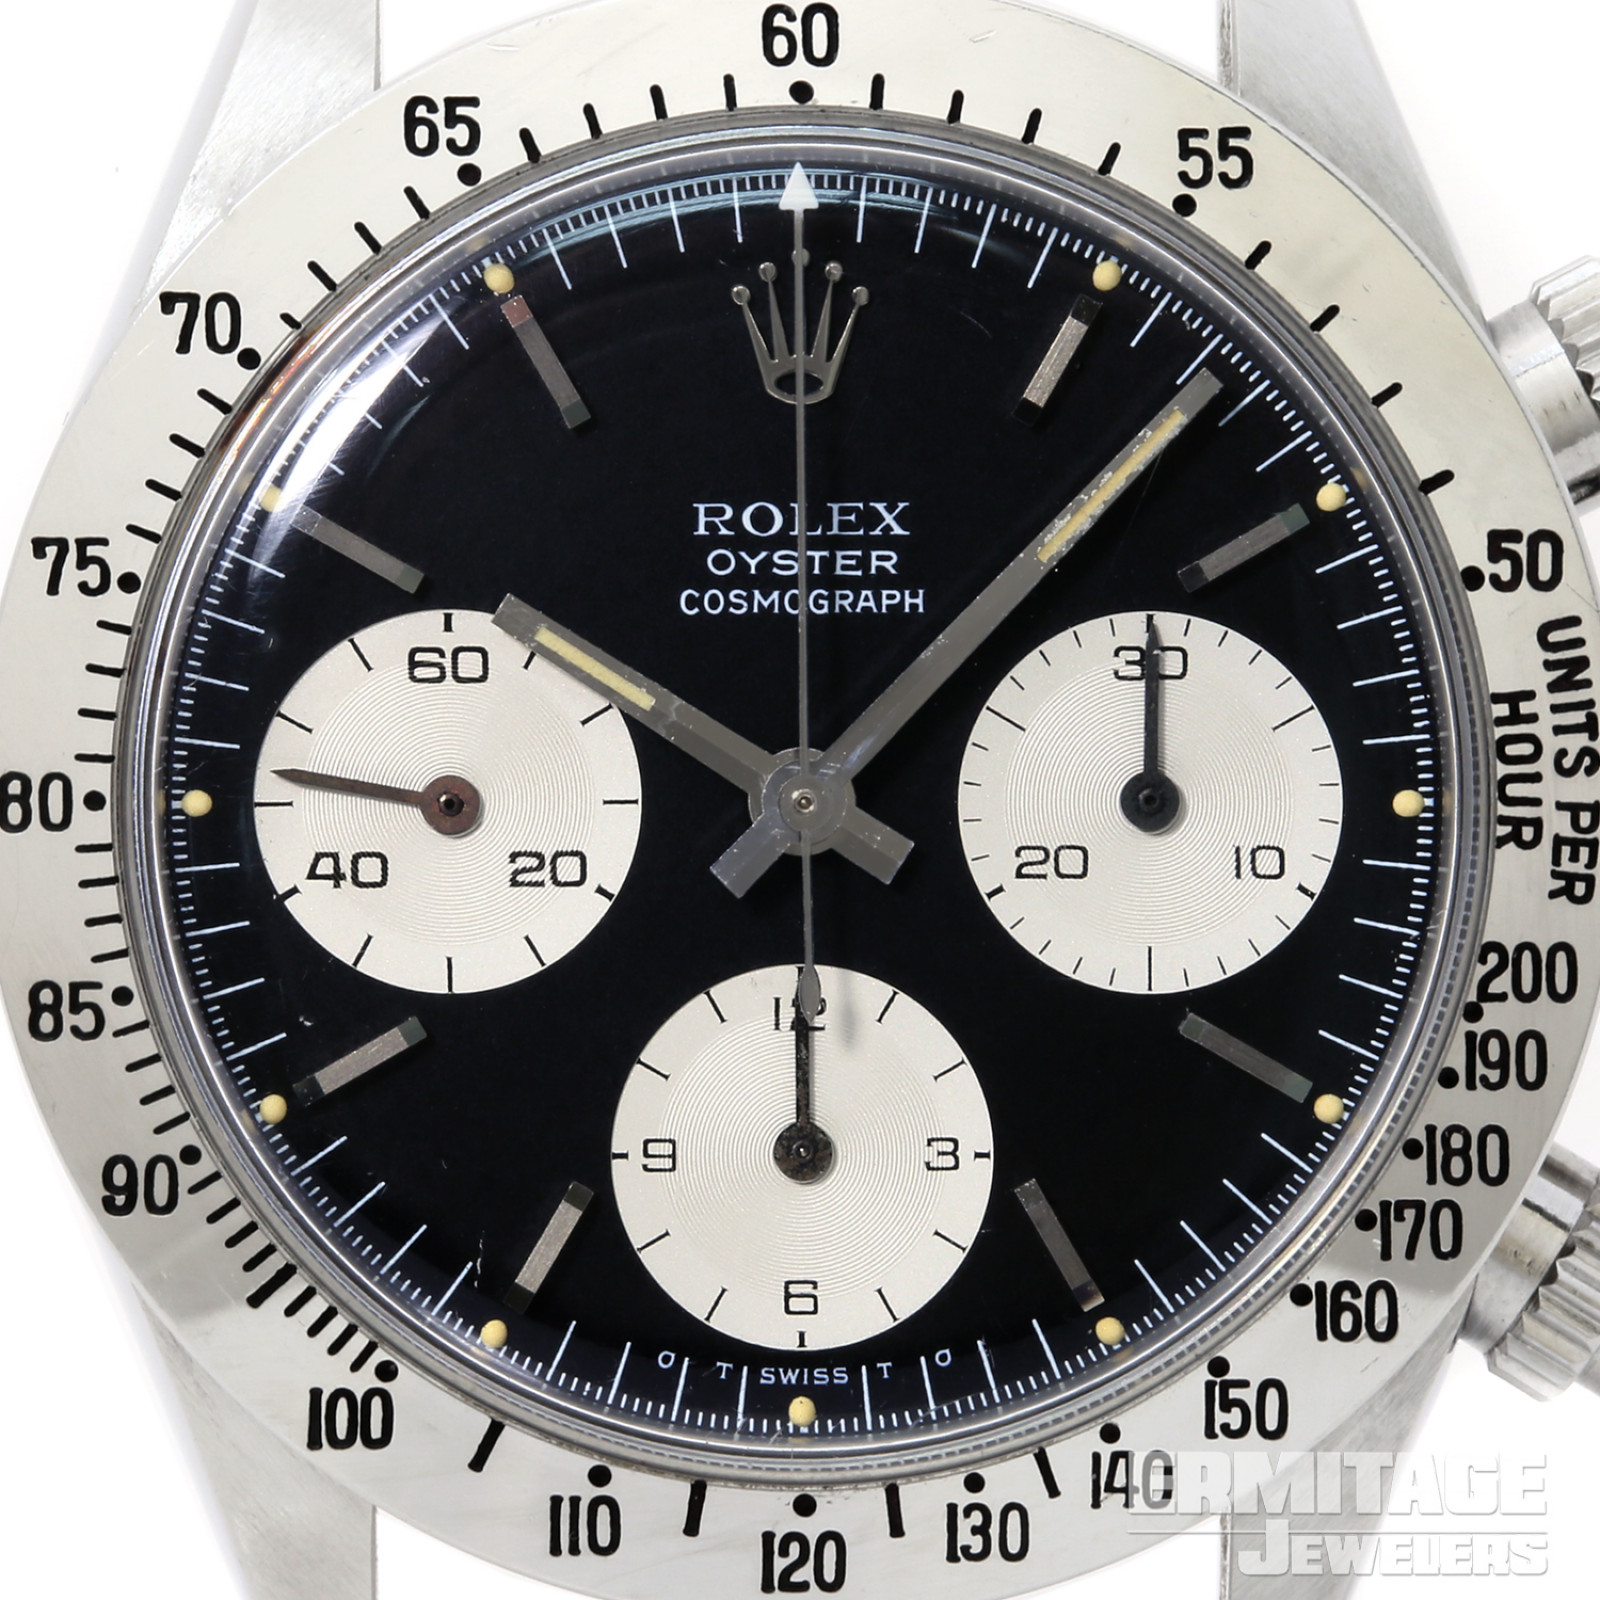 Vintage Rolex Oyster Cosmograph 6265